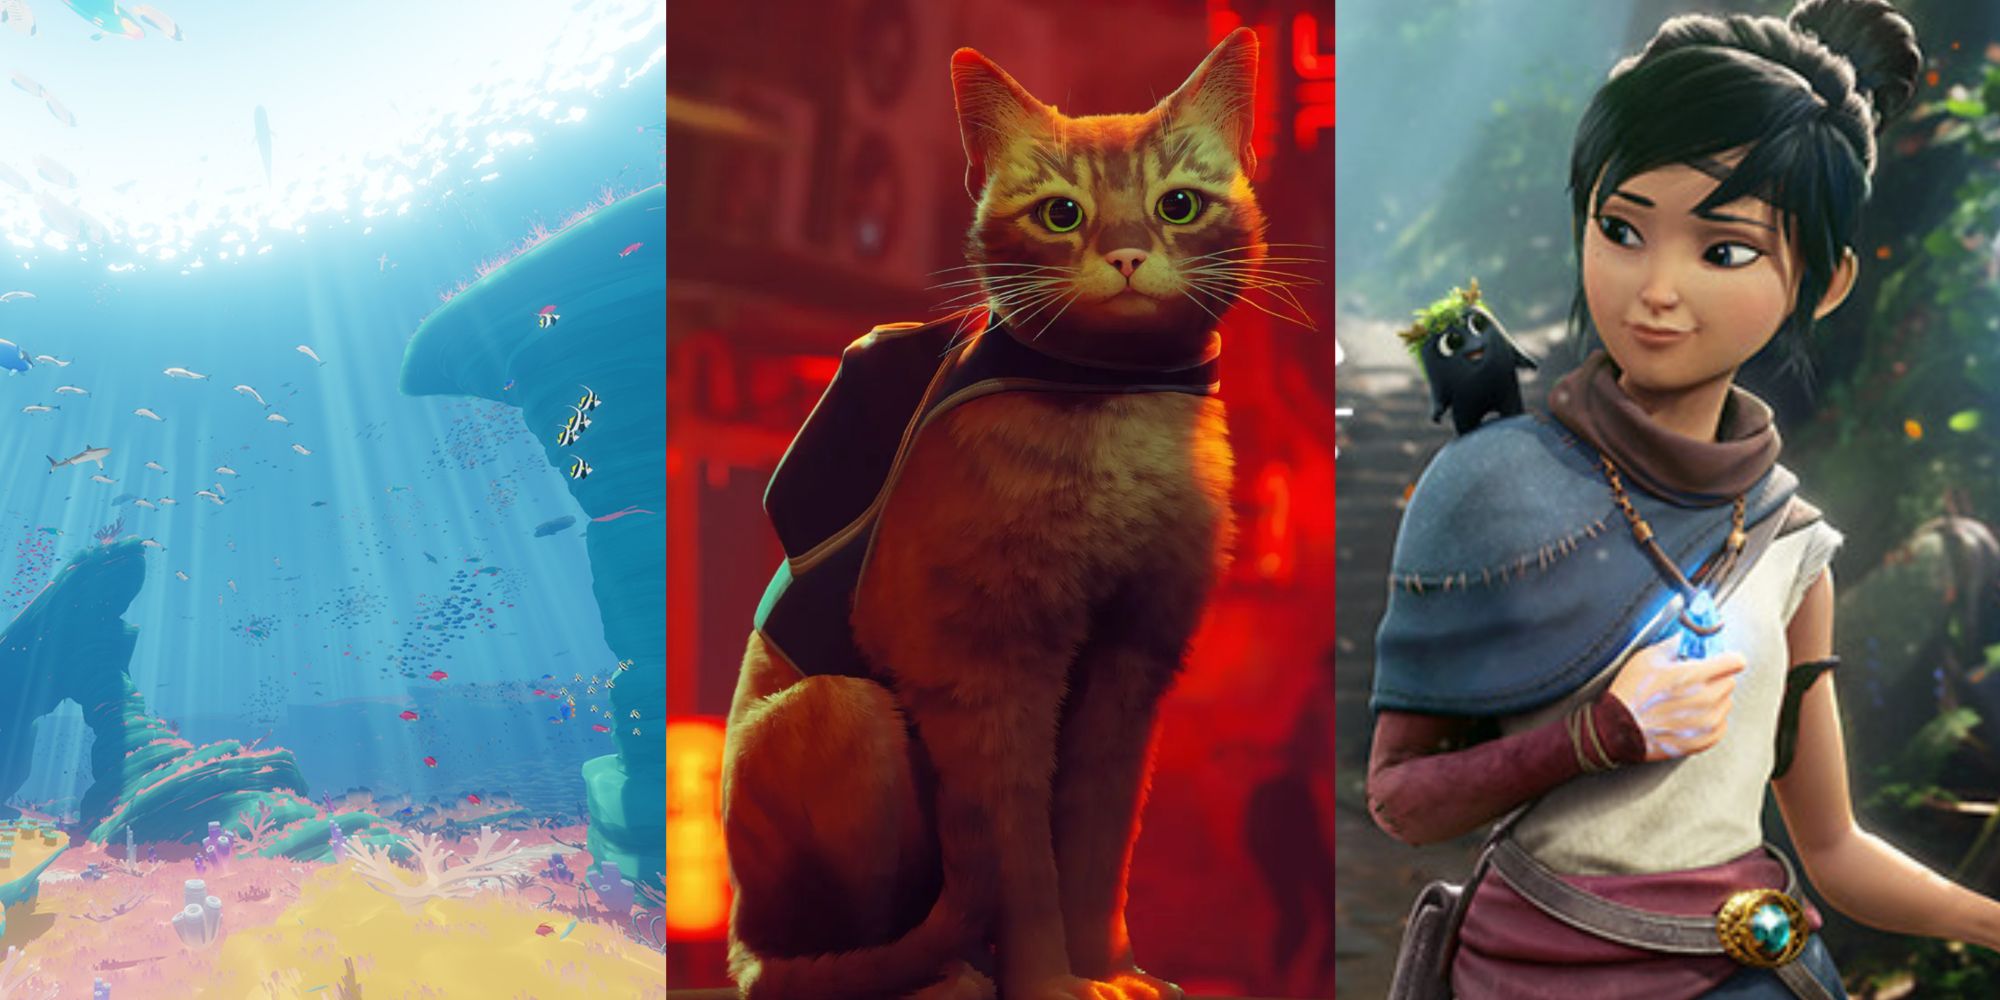 Unreal Indie games collage - Abzu on left, Stray in center, Kena Bridge of Spirits on right